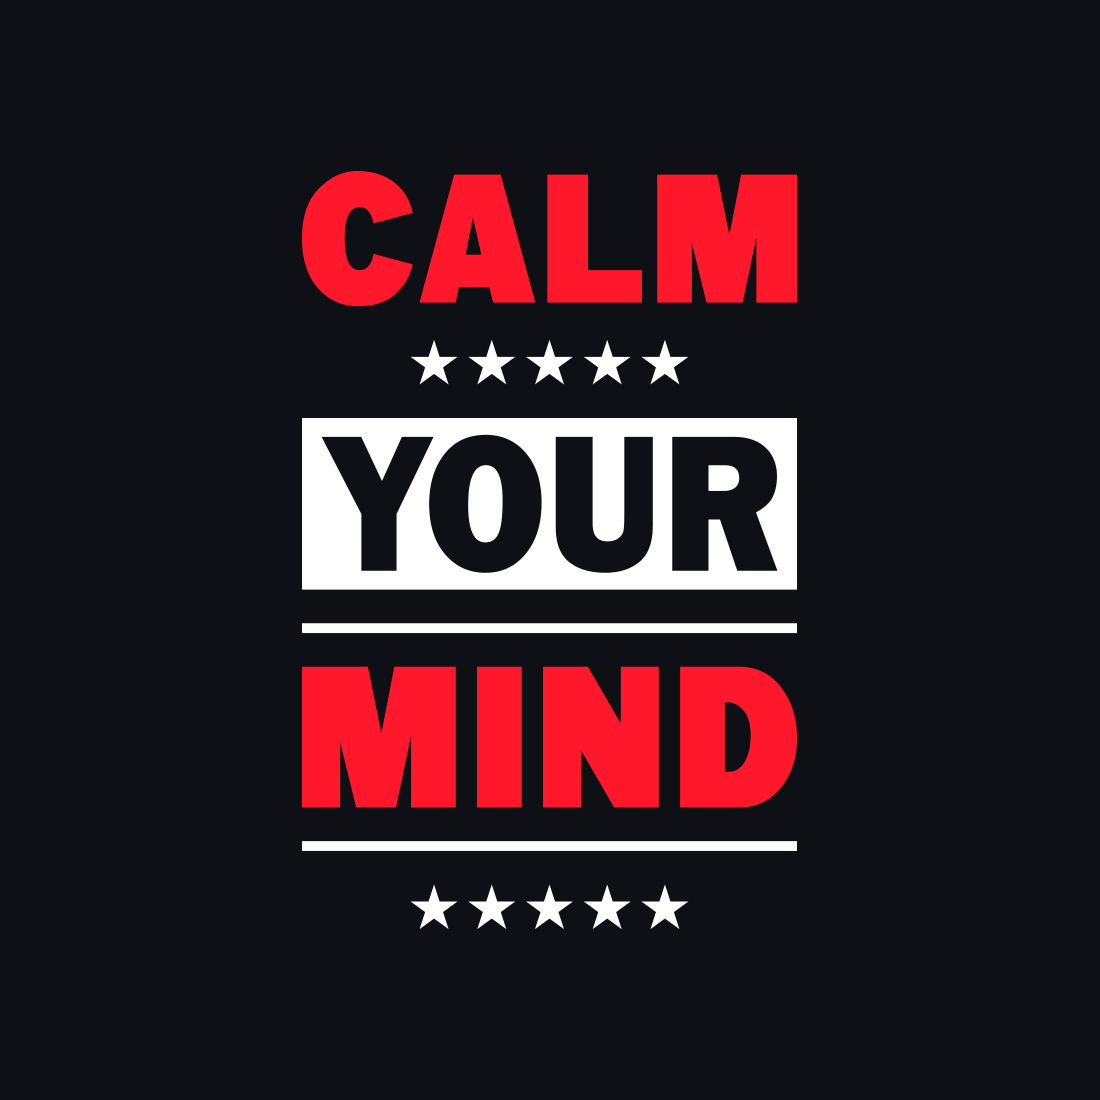 An image with a wonderful "Calm your mind" inscription in white and red.